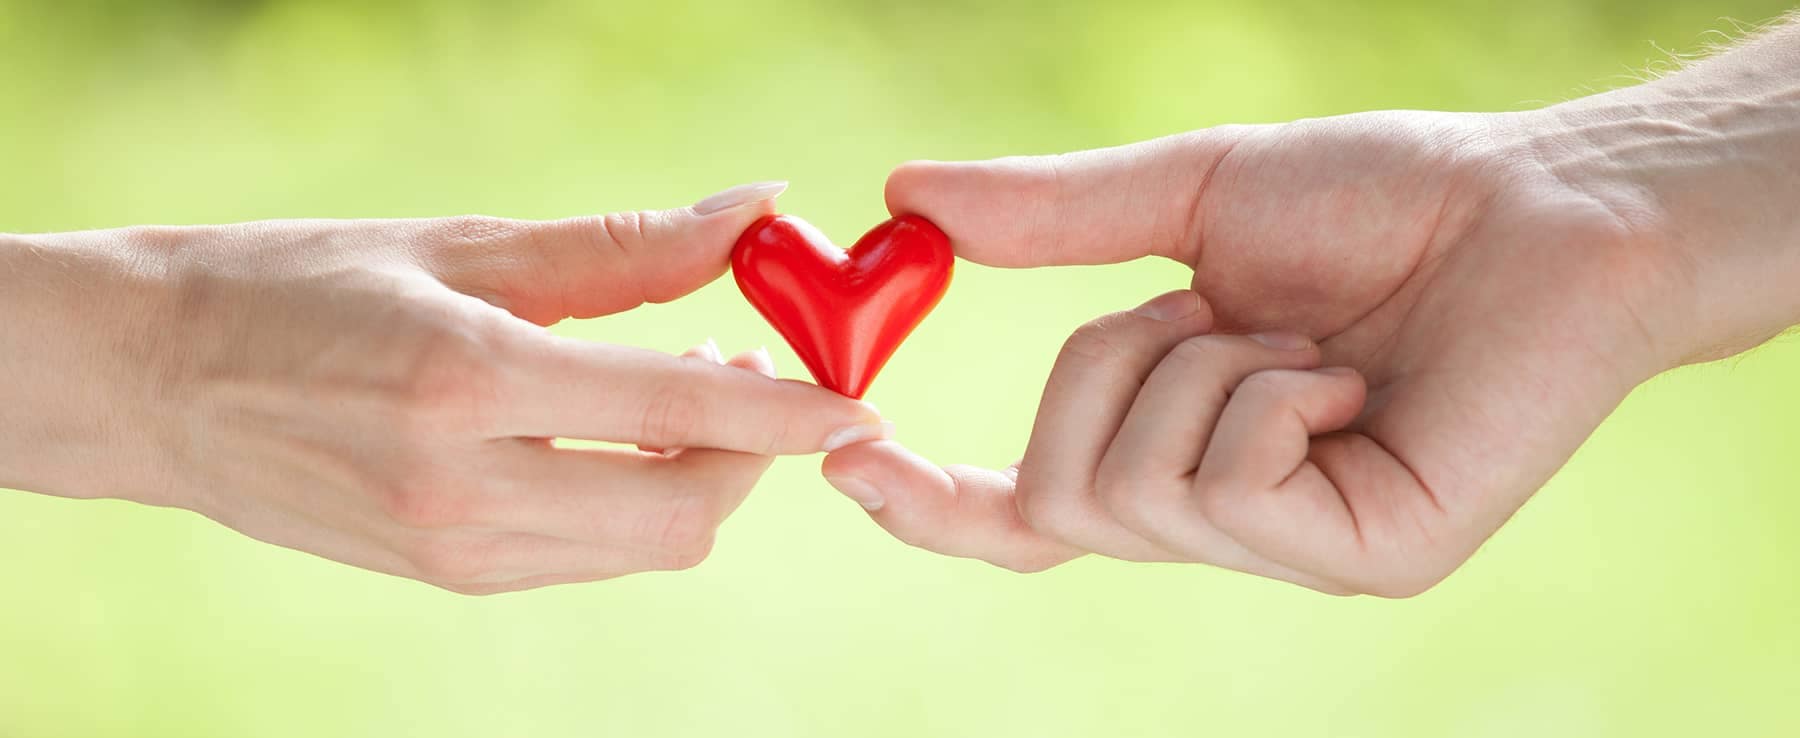 two people_s hands holding a small heart